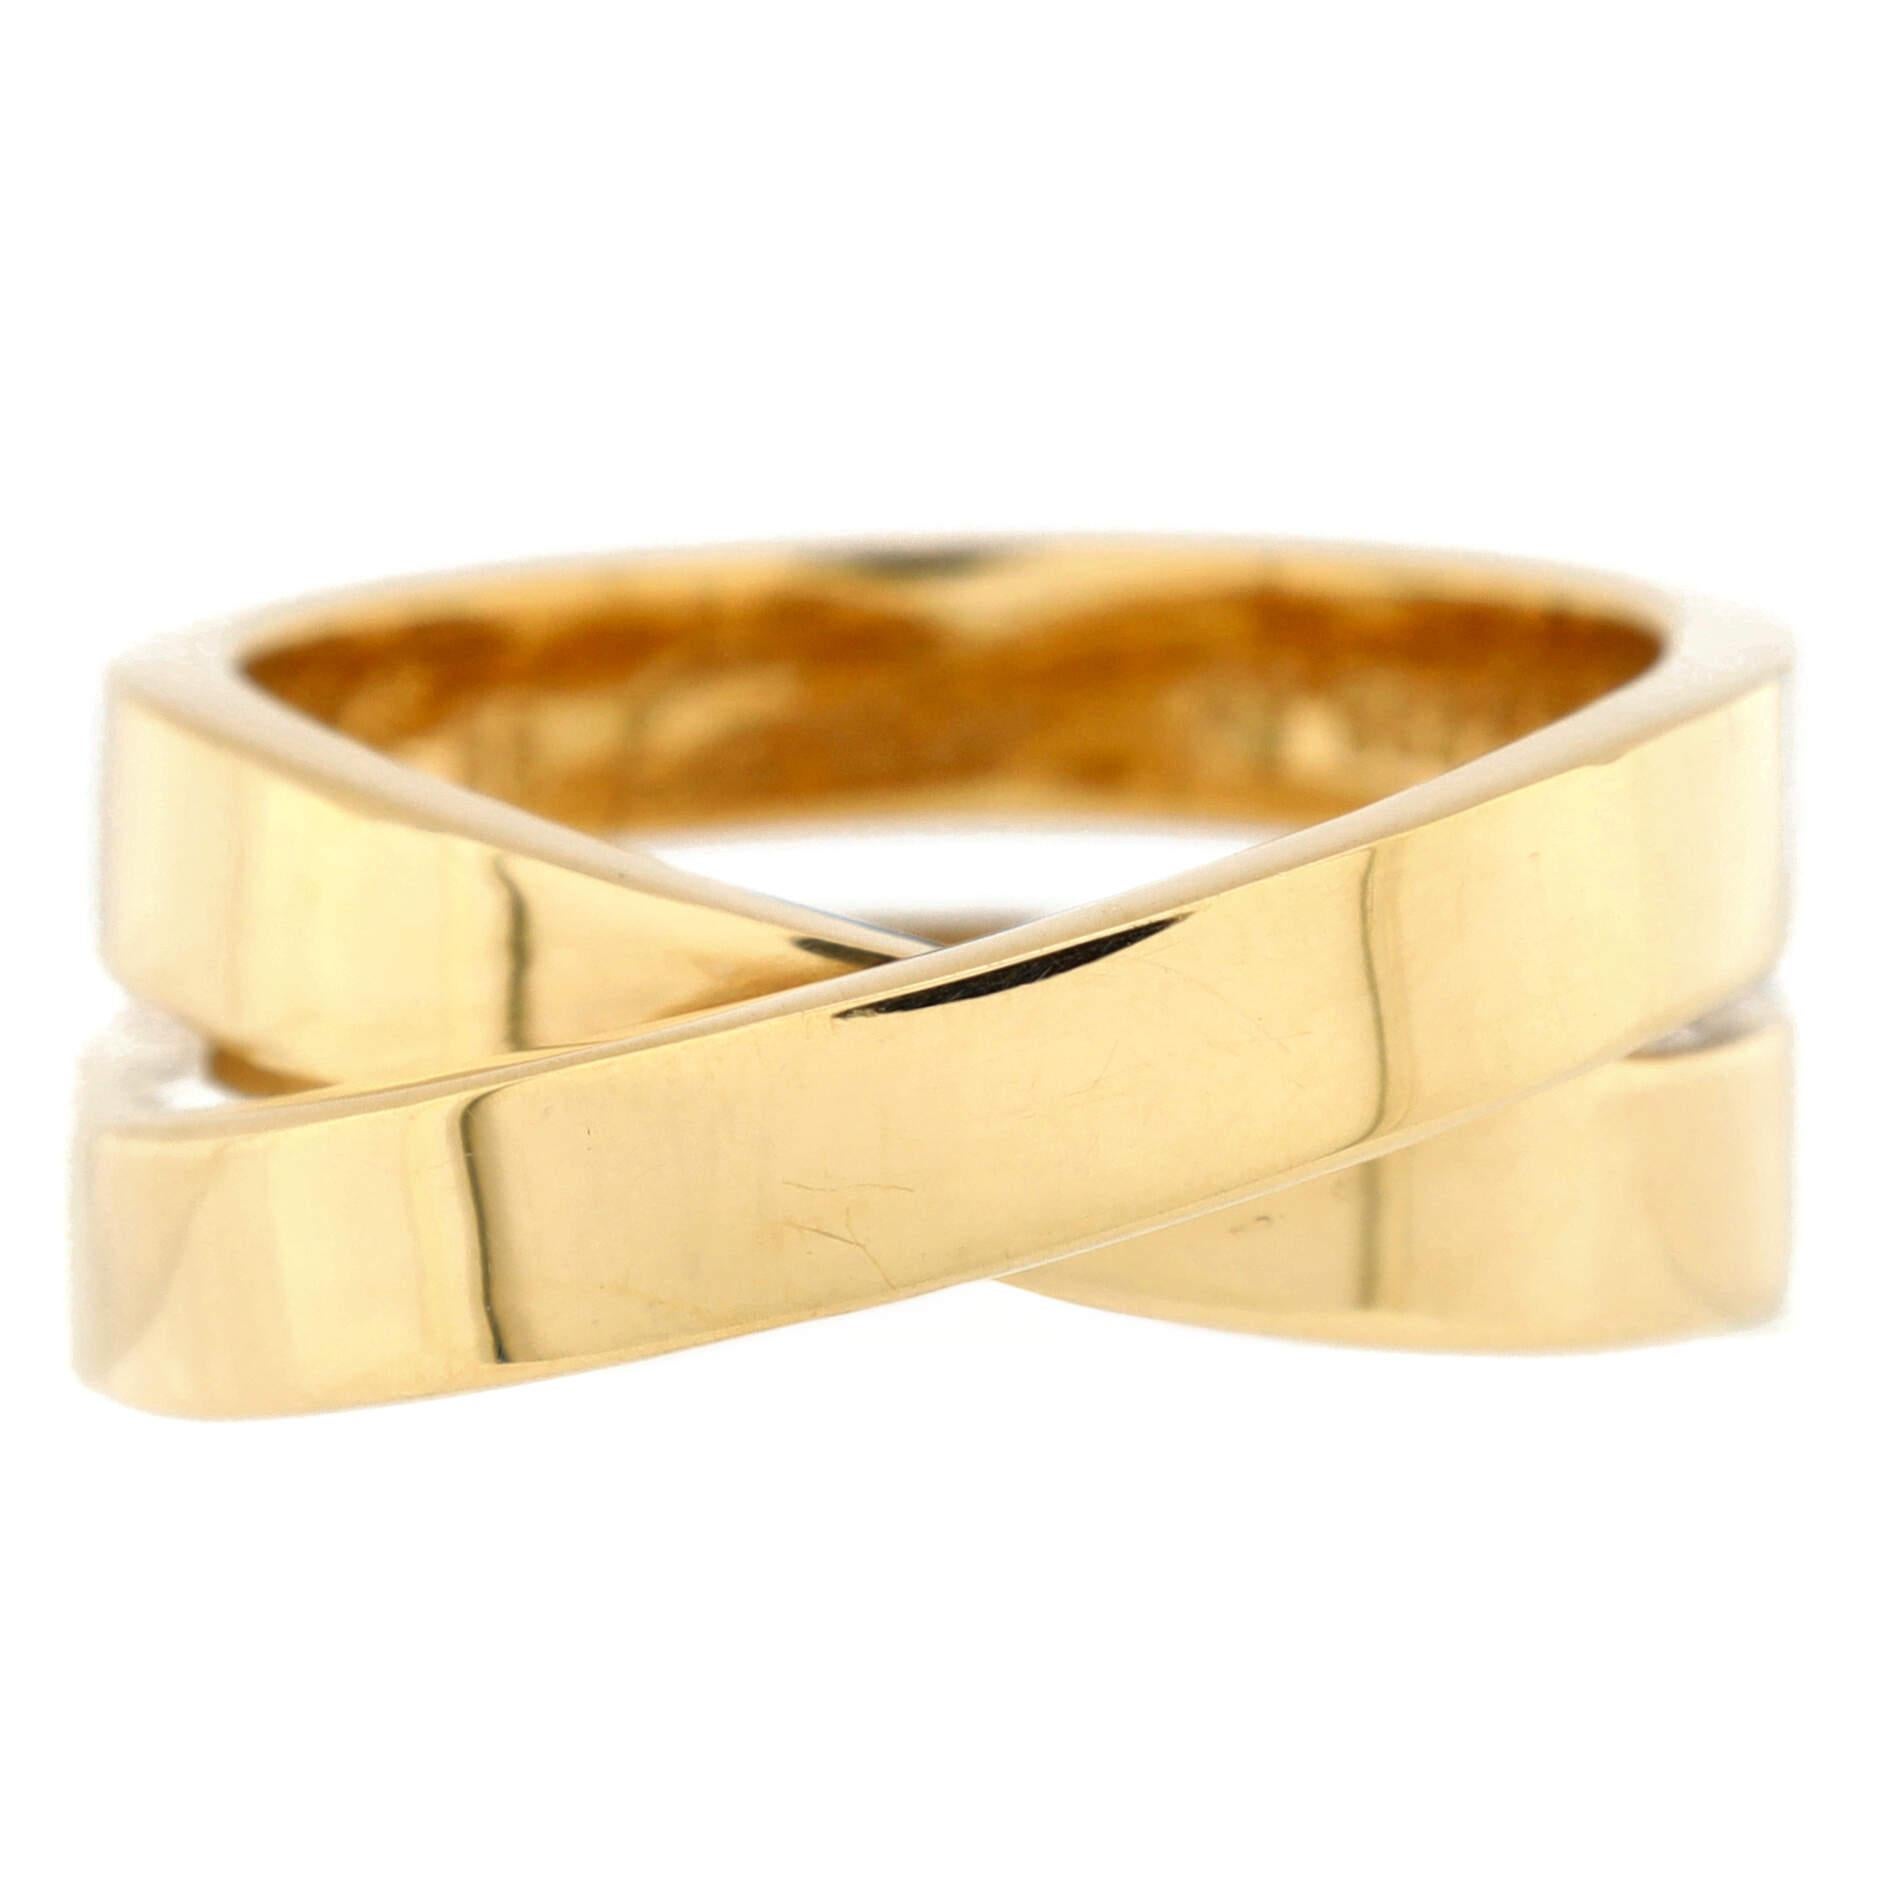 Condition: Very good. Moderate wear and re-polishing throughout.
Accessories: No Accessories
Measurements: Size: 7.5 - 56, Width: 9.00 mm
Designer: Cartier
Model: Paris Nouvelle Vague Crossover Ring 18K Yellow Gold
Exterior Color: Yellow Gold
Item